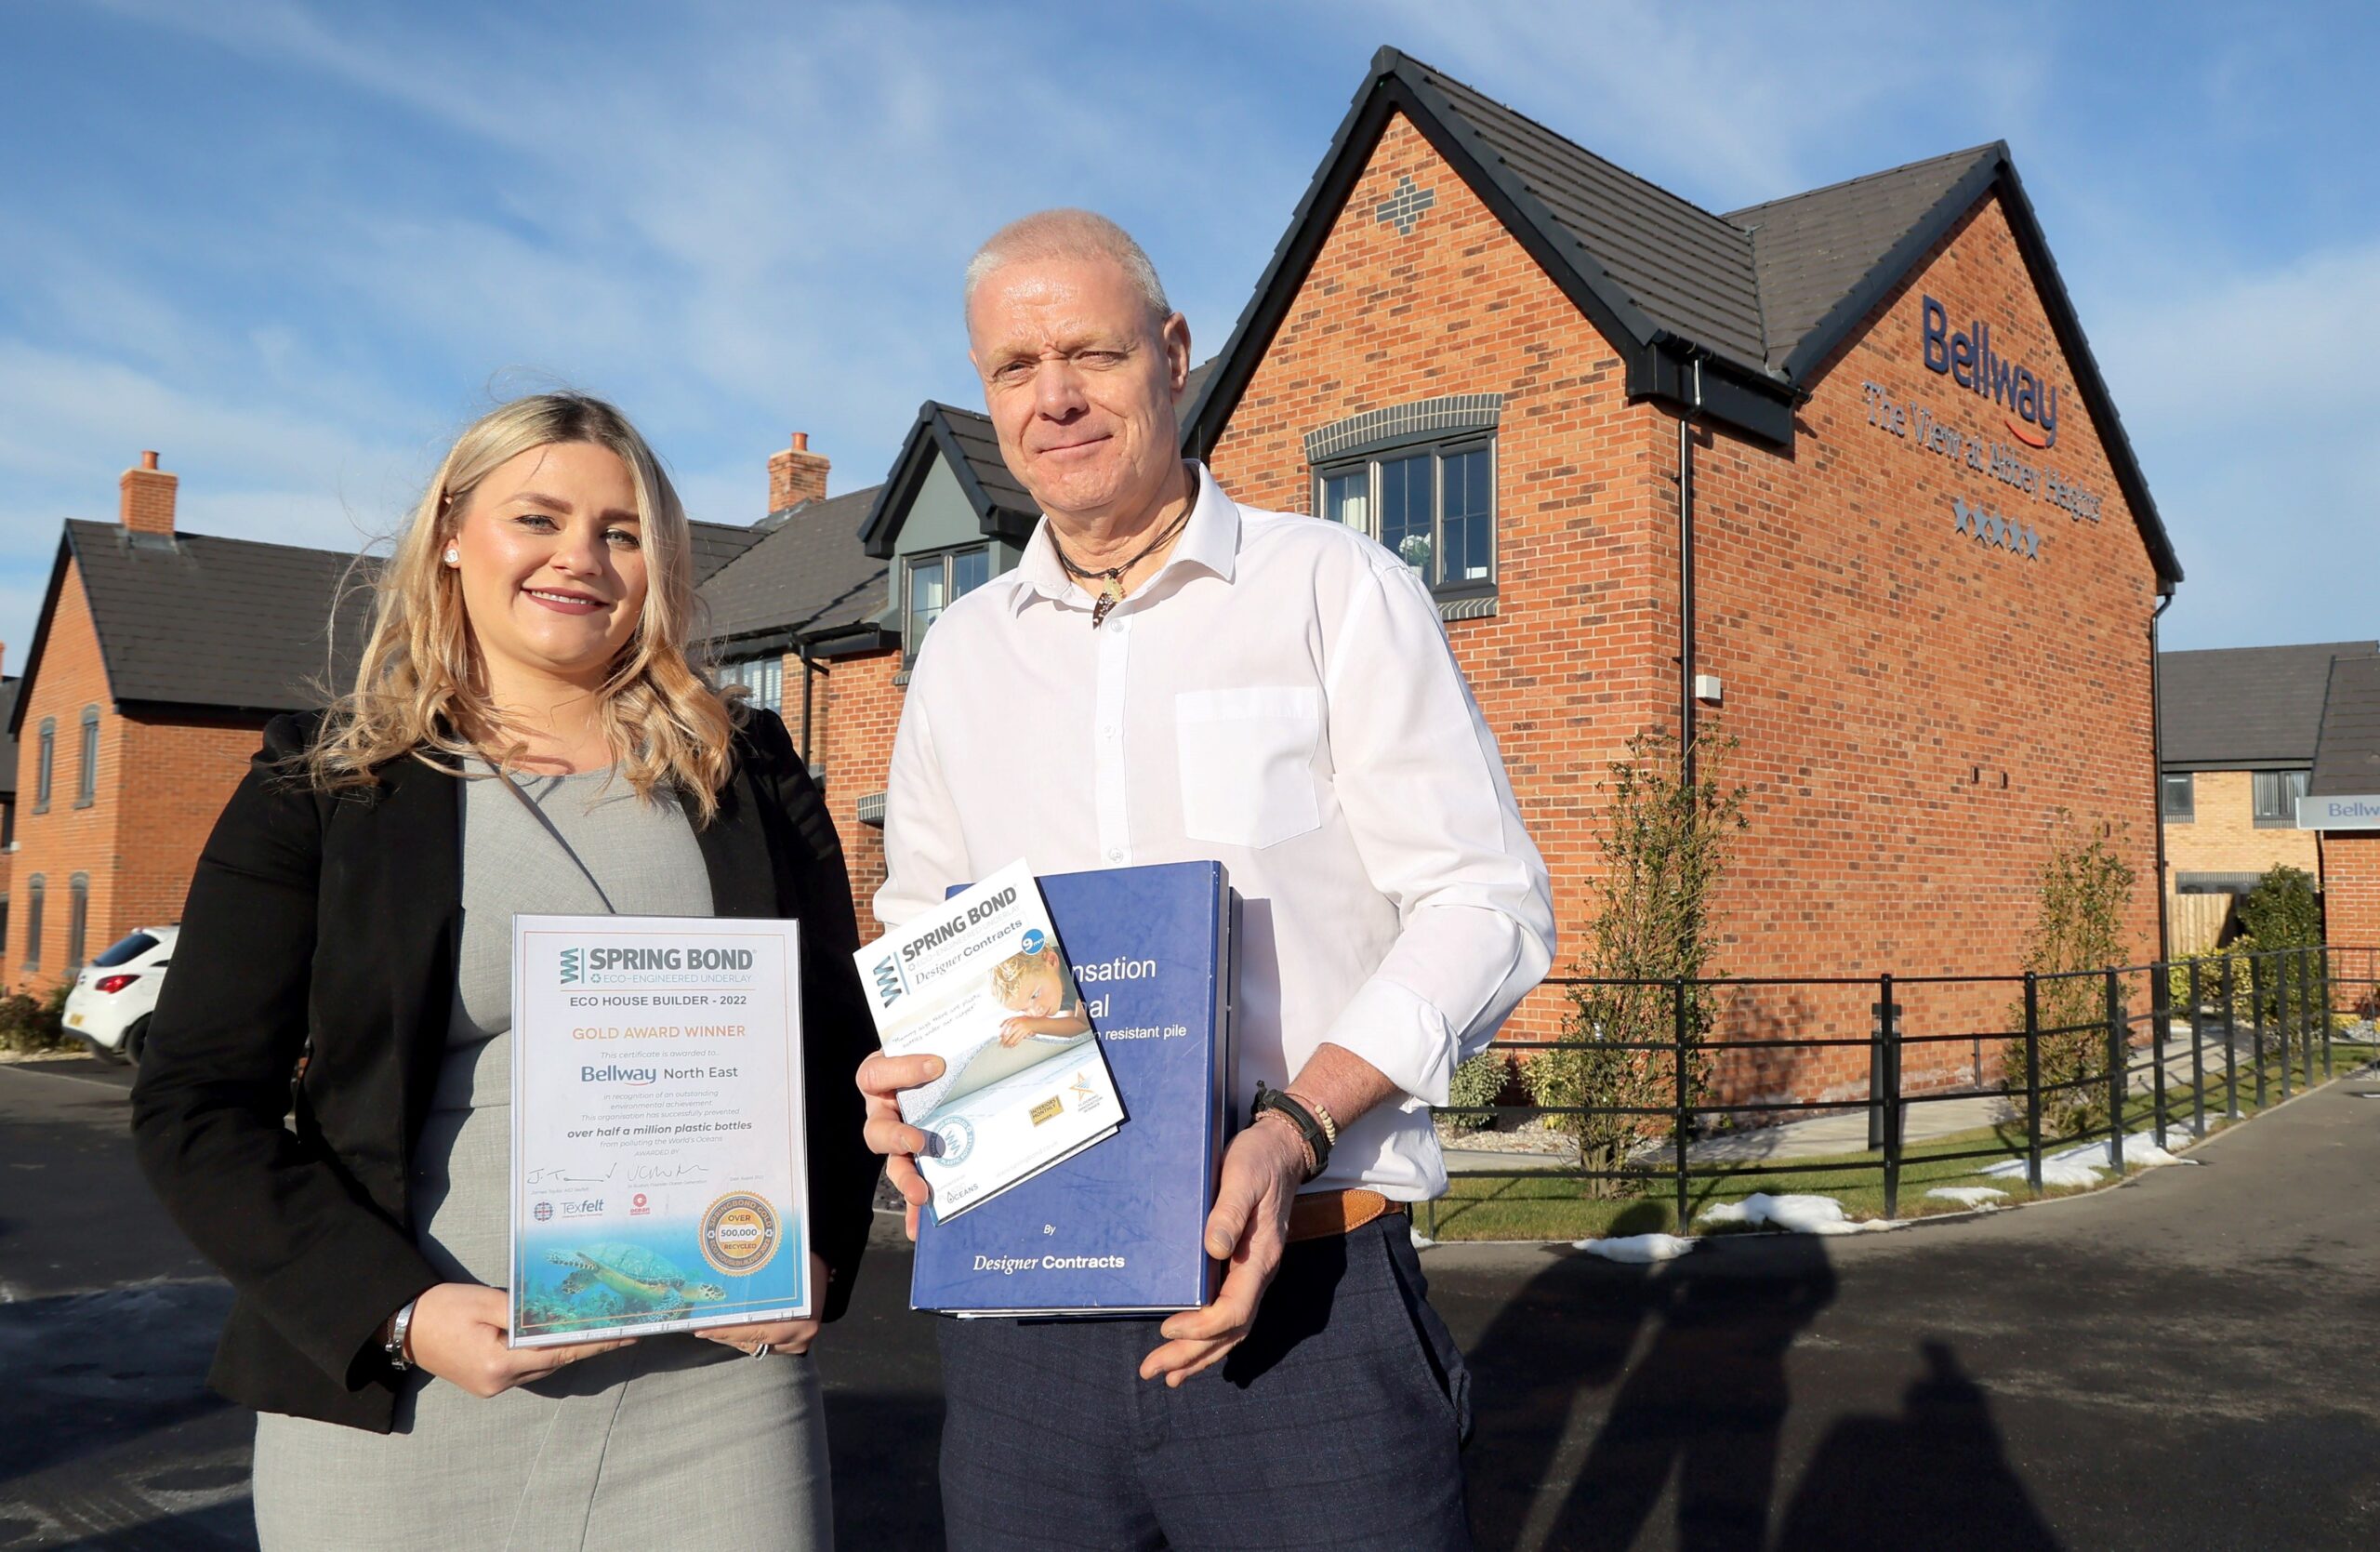 Barry Norton and Danielle Brown pictured in front of a Bellway home holding the Gold award